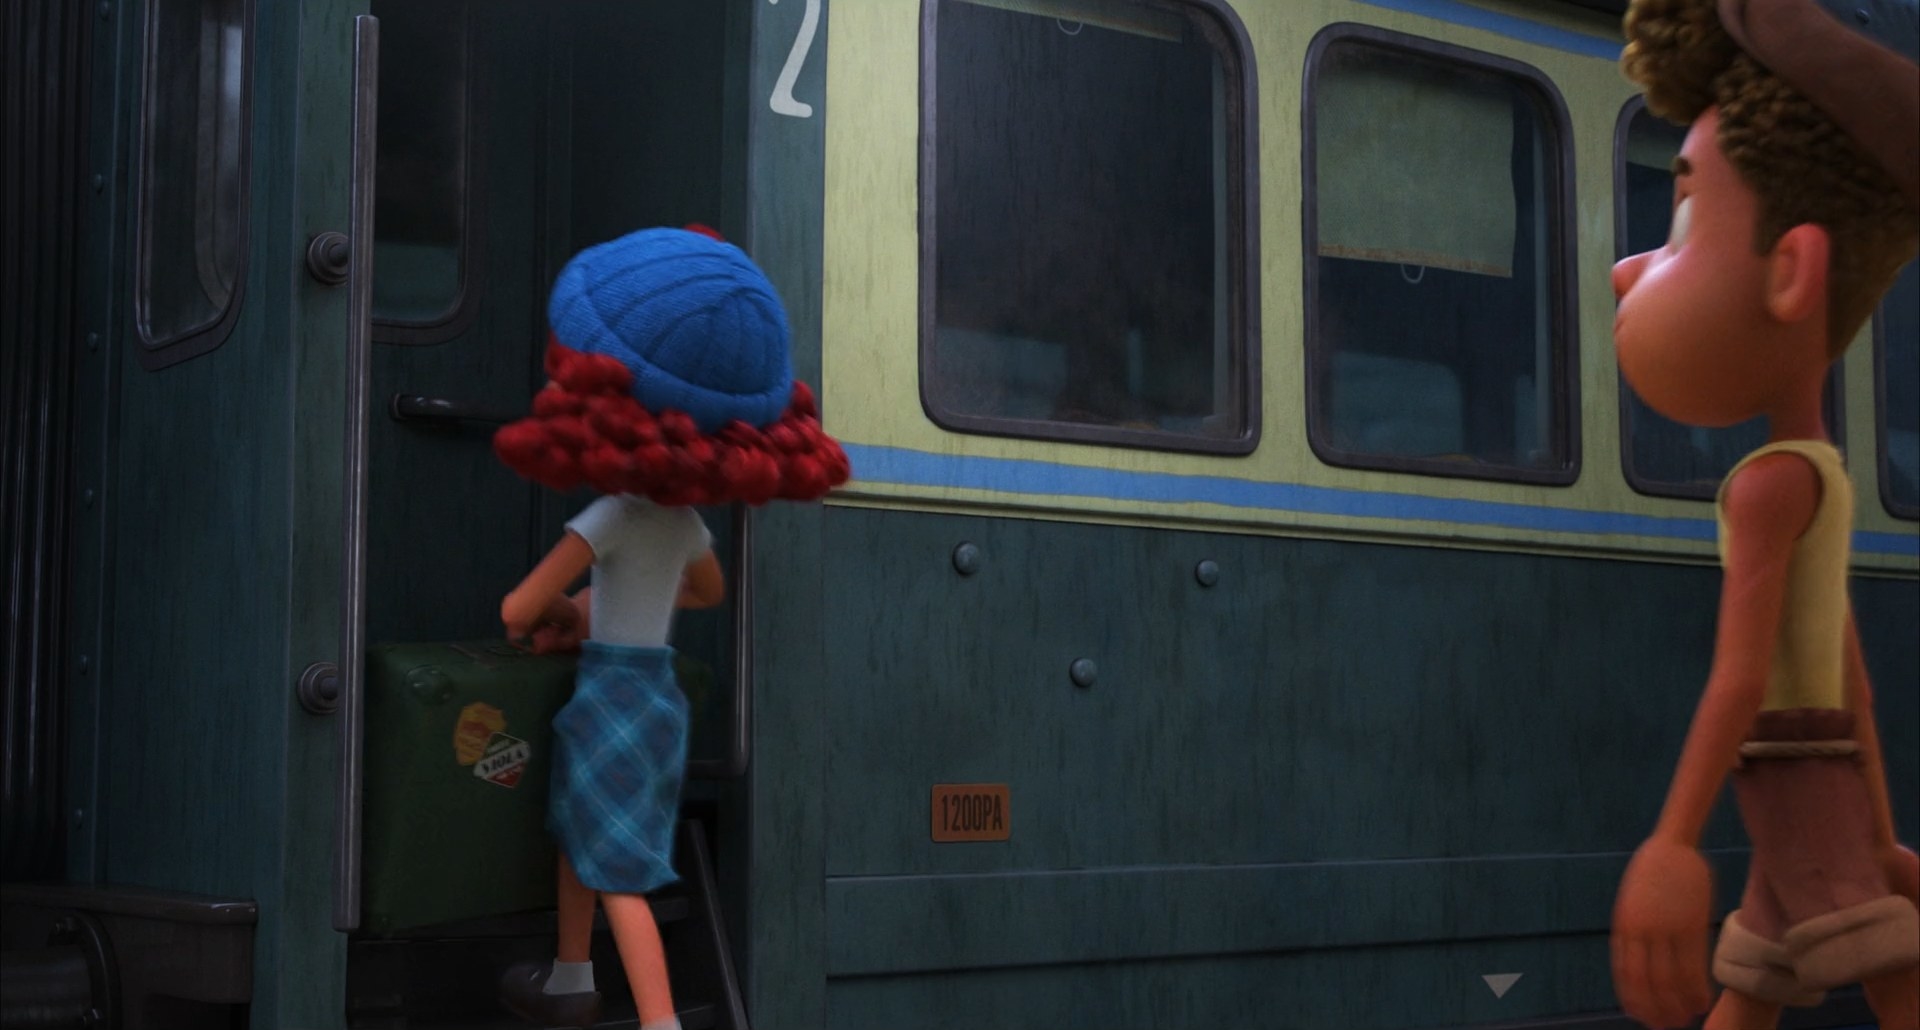 A redhaired girl boards a train.